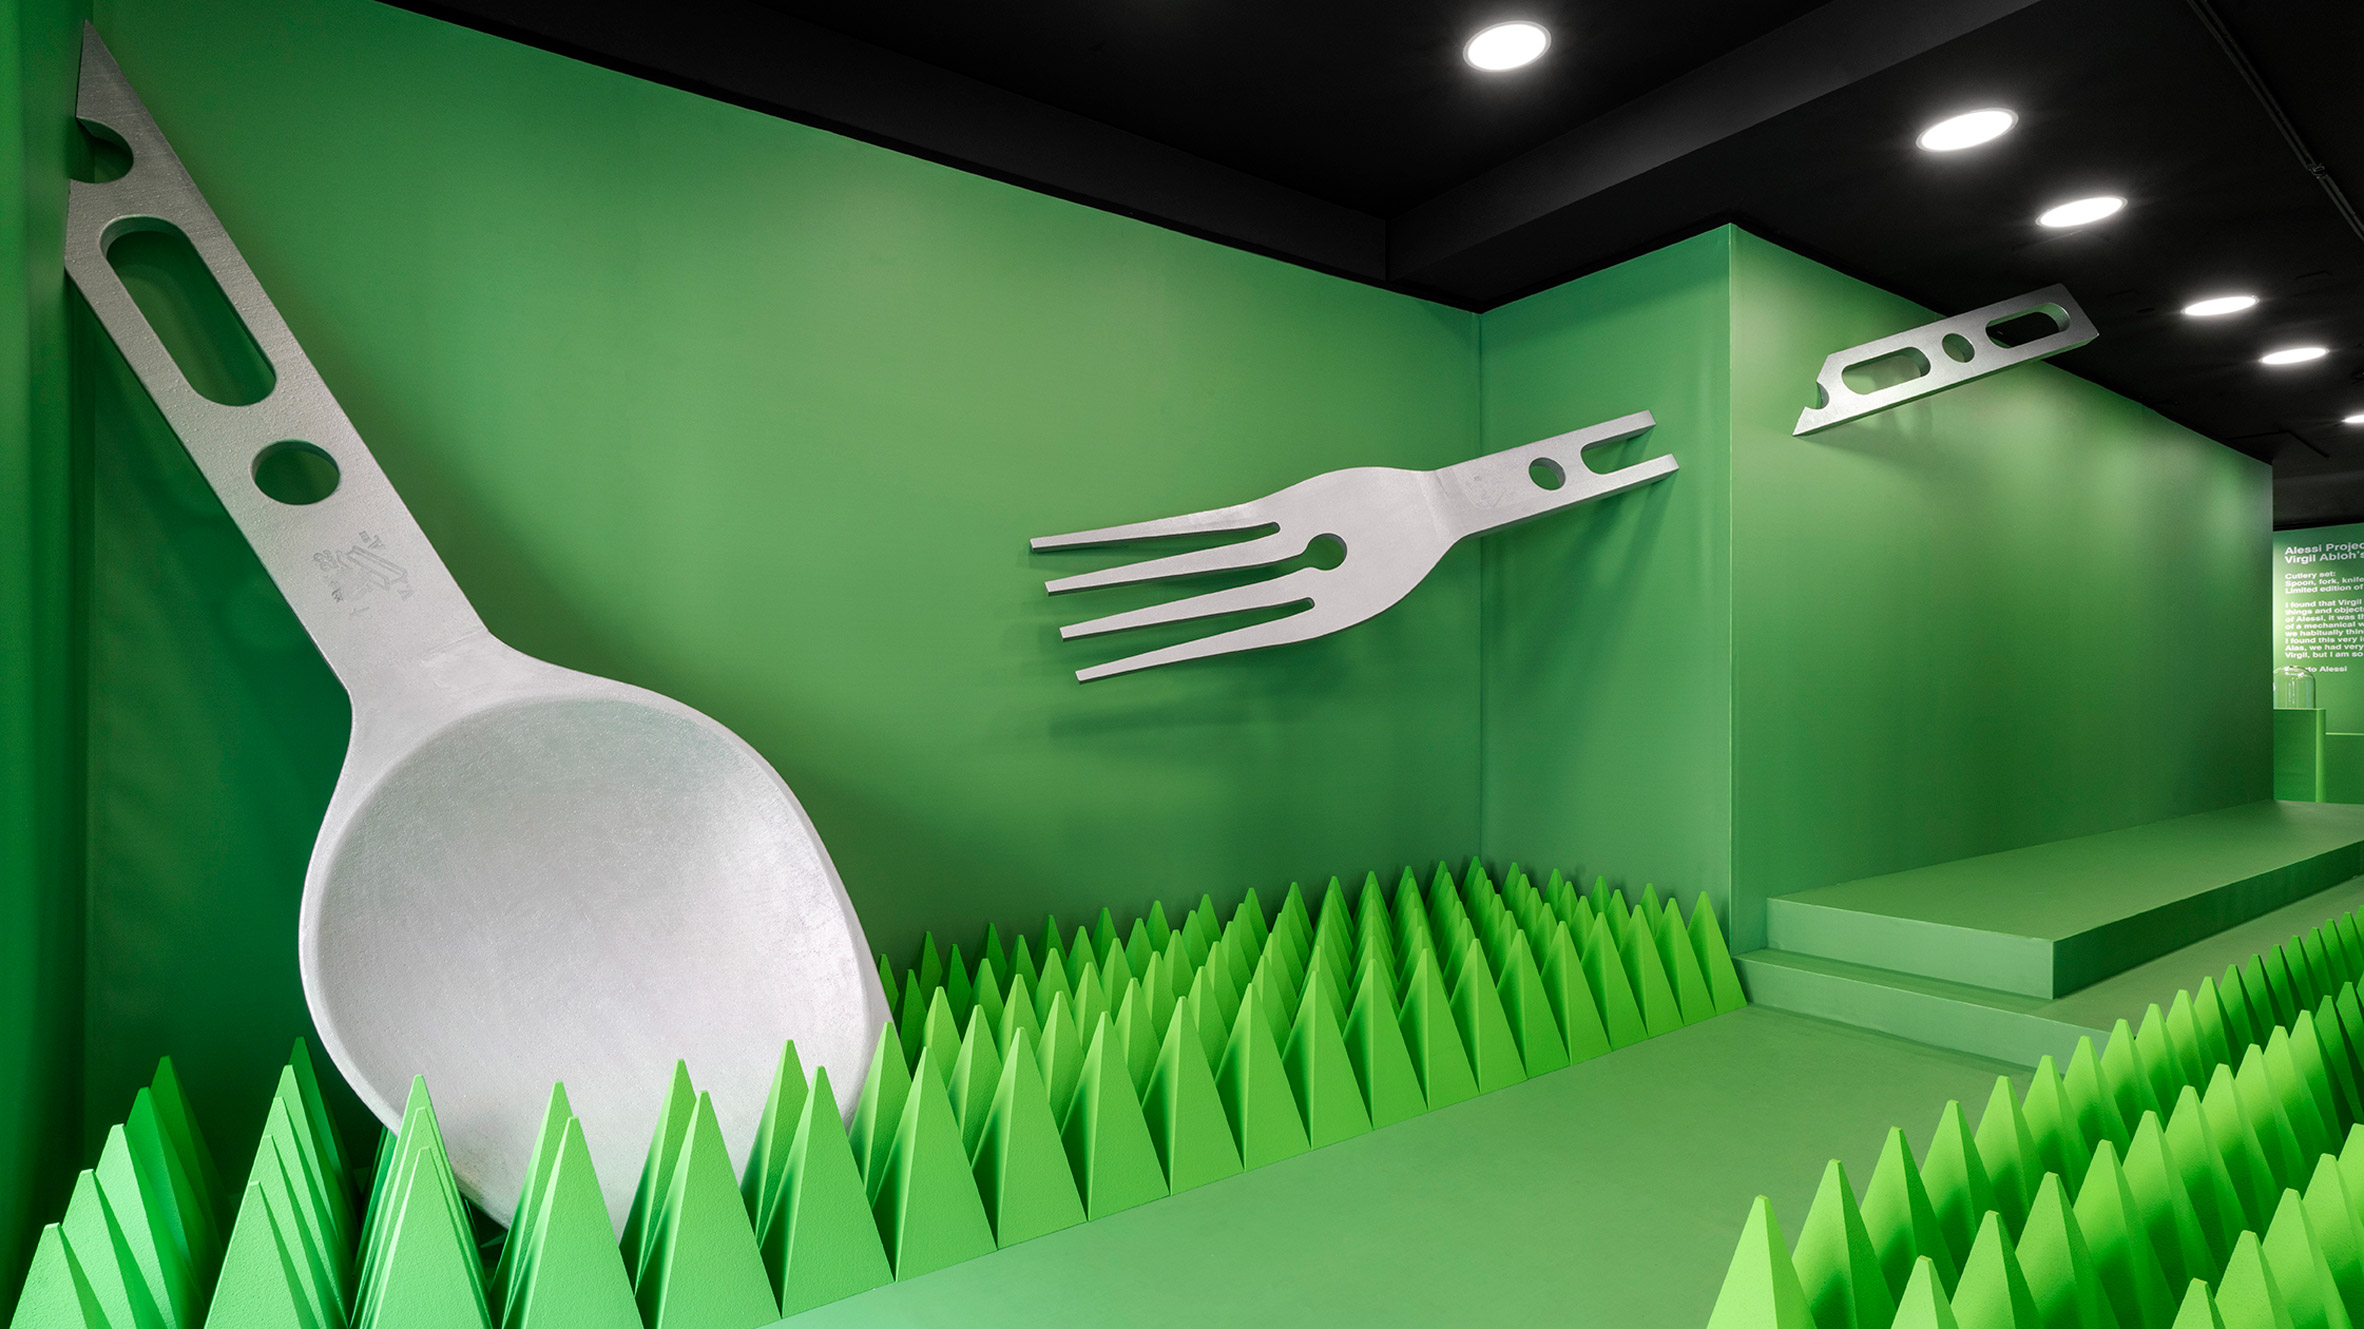 Alessi Virgil Abloh 'Occasional Object' Cutlery Set – Jane